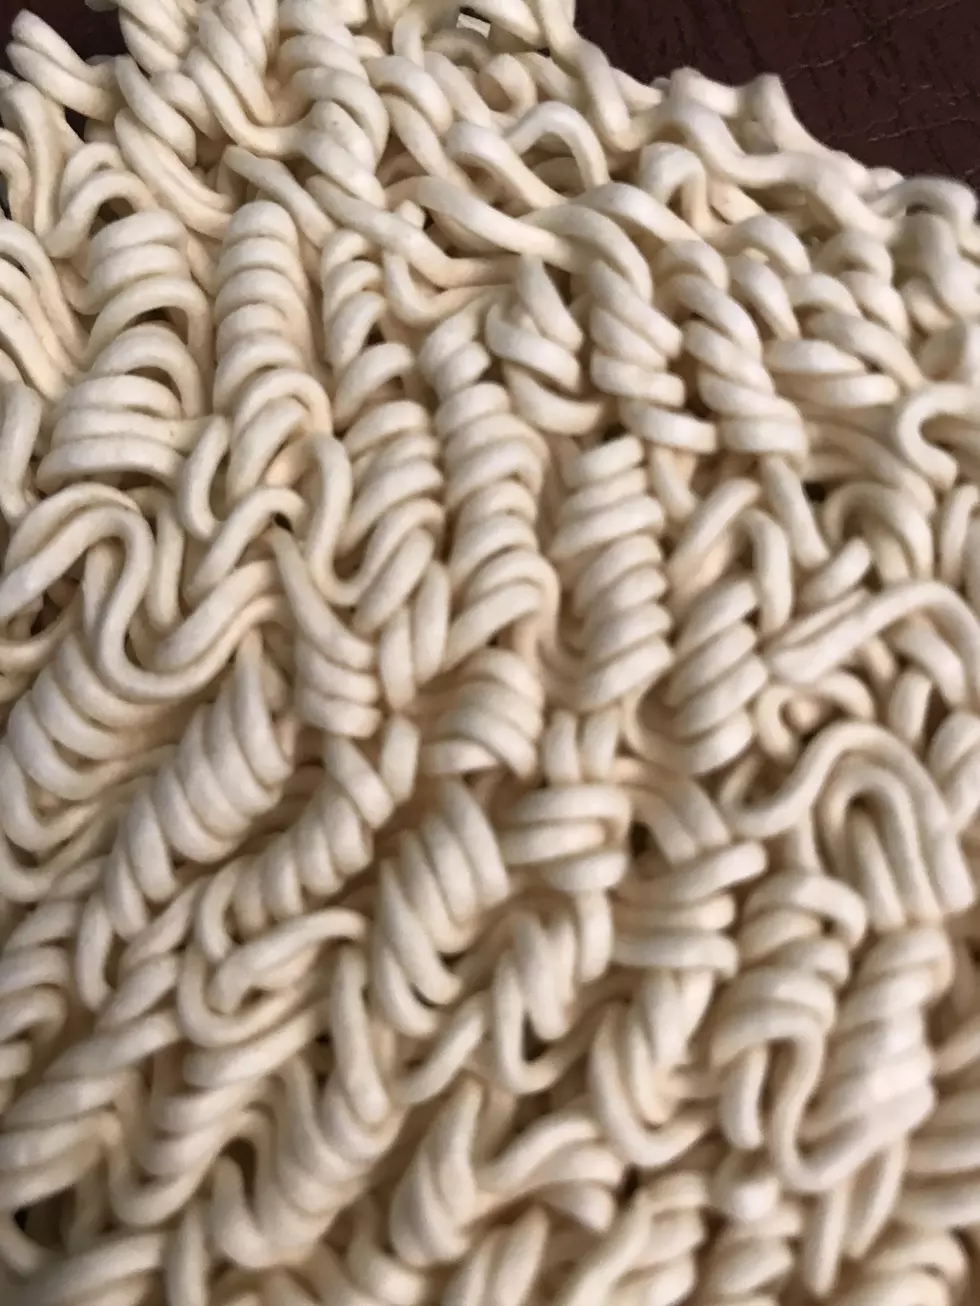 Calling all noodle lovers! Earn $10,000 to test Top Ramen